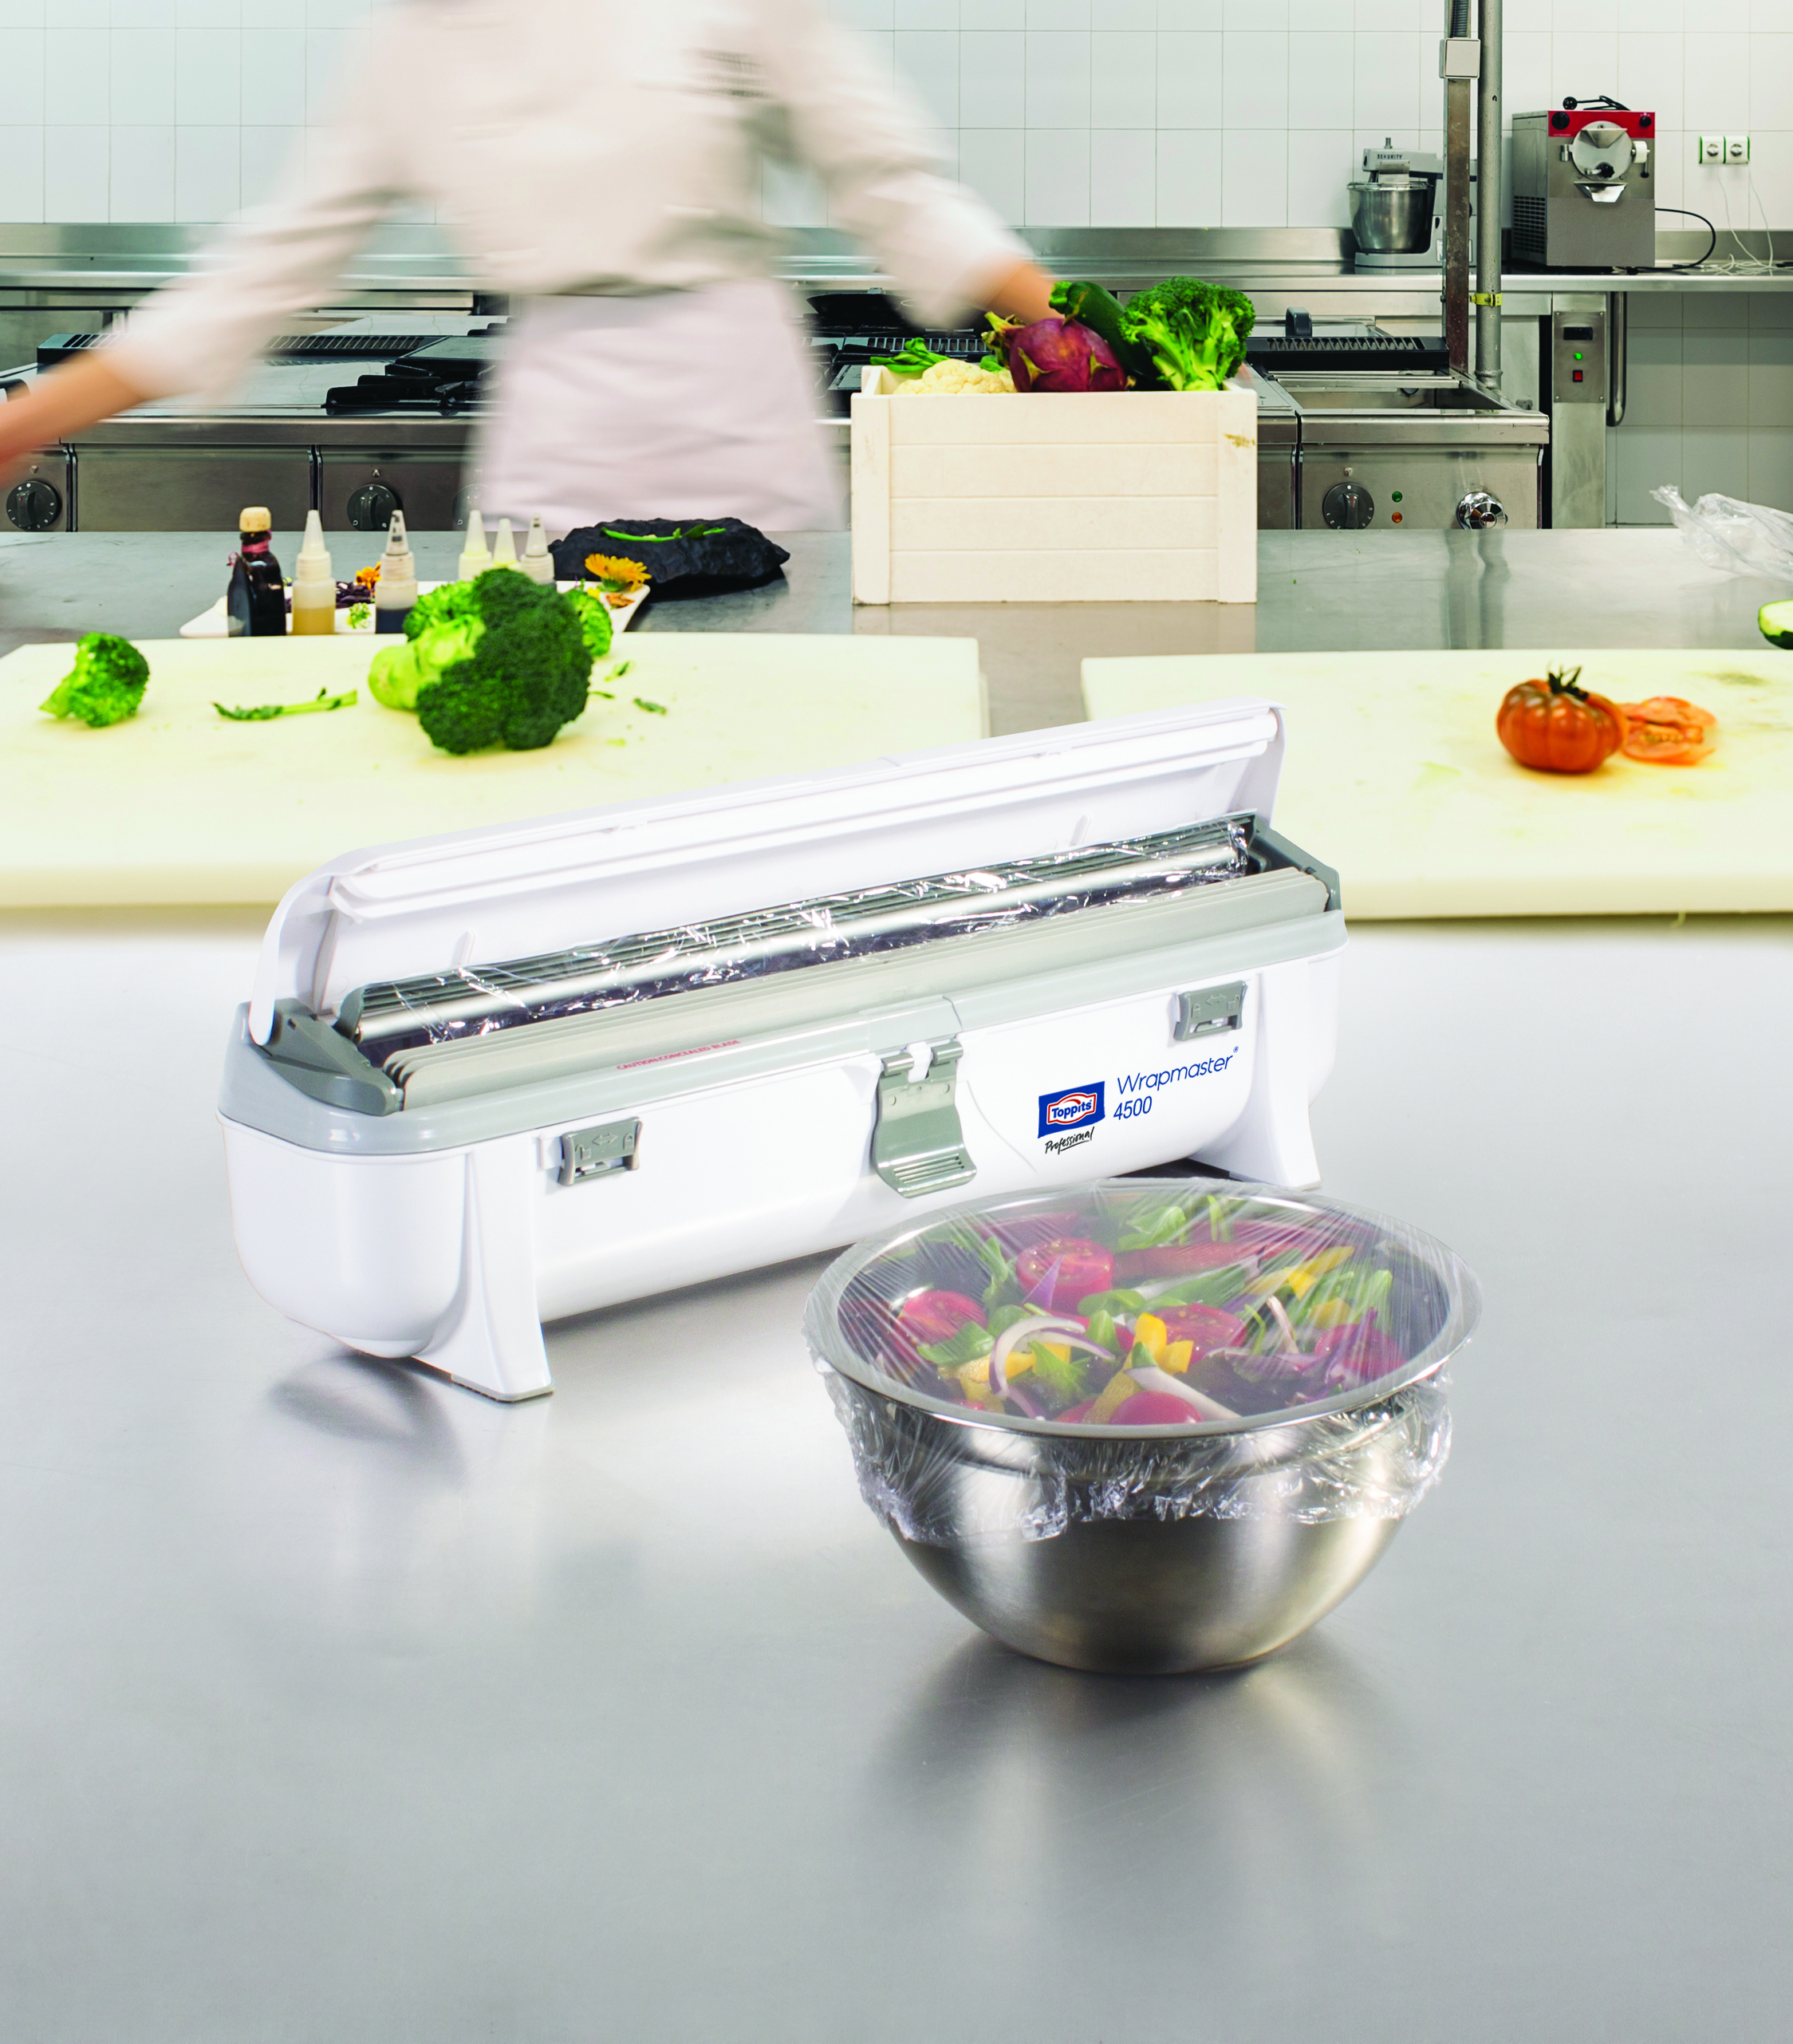 https://www.cocona.de/media/image/7a/3a/21/63M55-TOPPITS-PROFESSIONAL-WRAPMASTER-WITH-SPEEDY-CHEF-AND-SALAD-BOWL-ON-STEEL.jpg